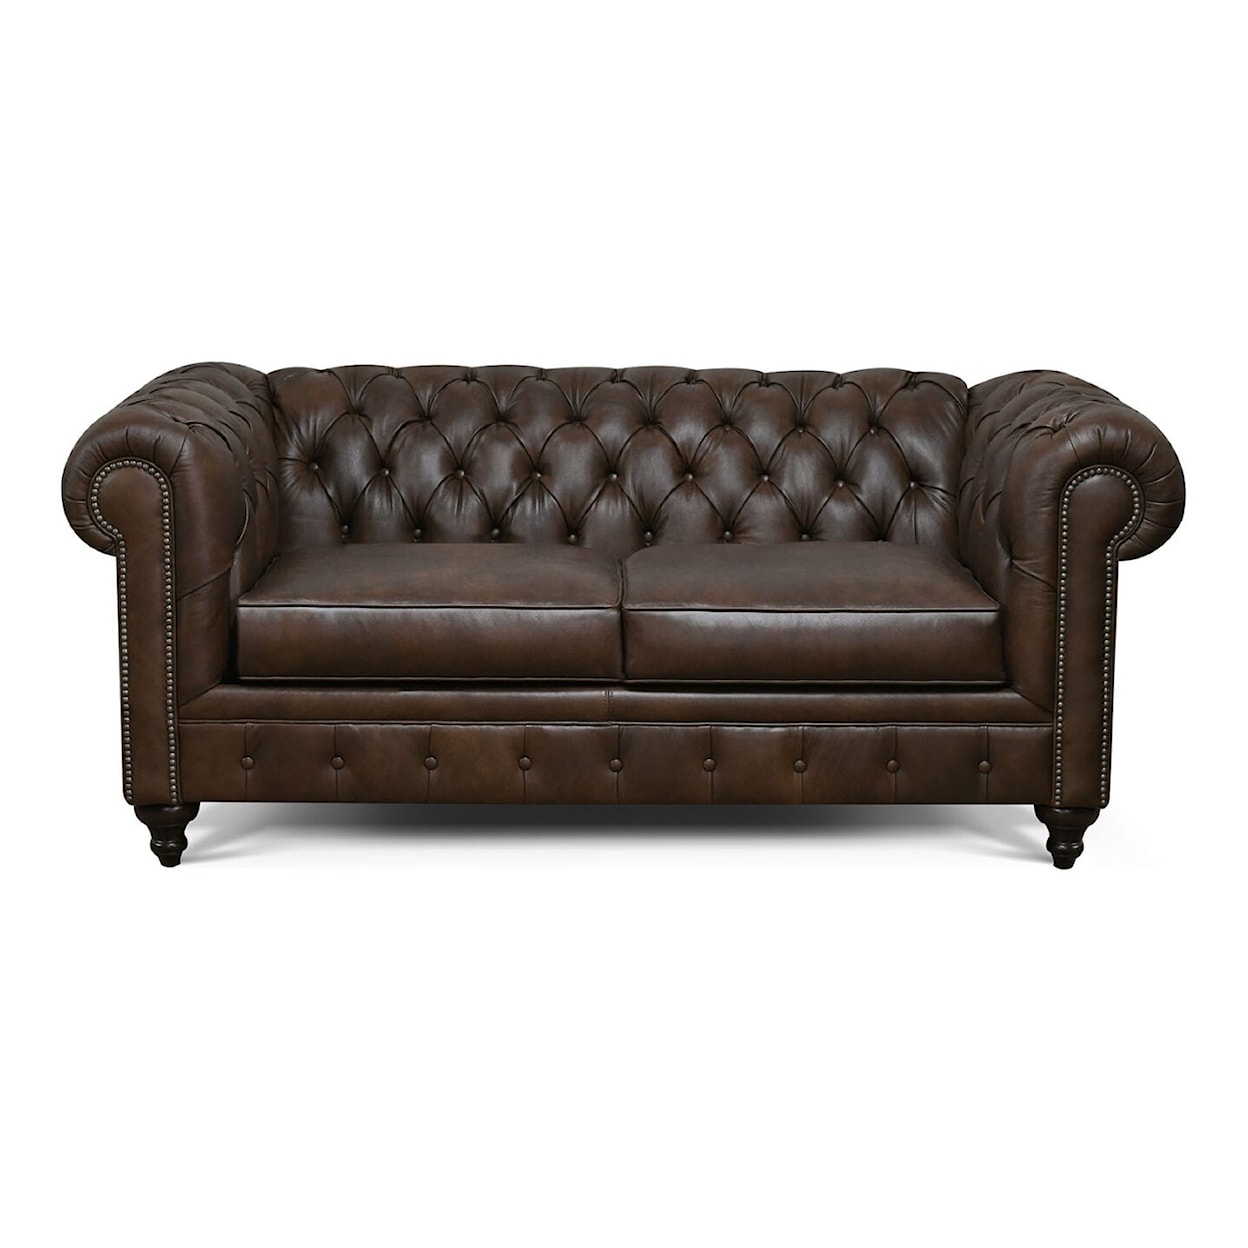 Tennessee Custom Upholstery 2R00/AL Series Chesterfield Loveseat with Nailheads